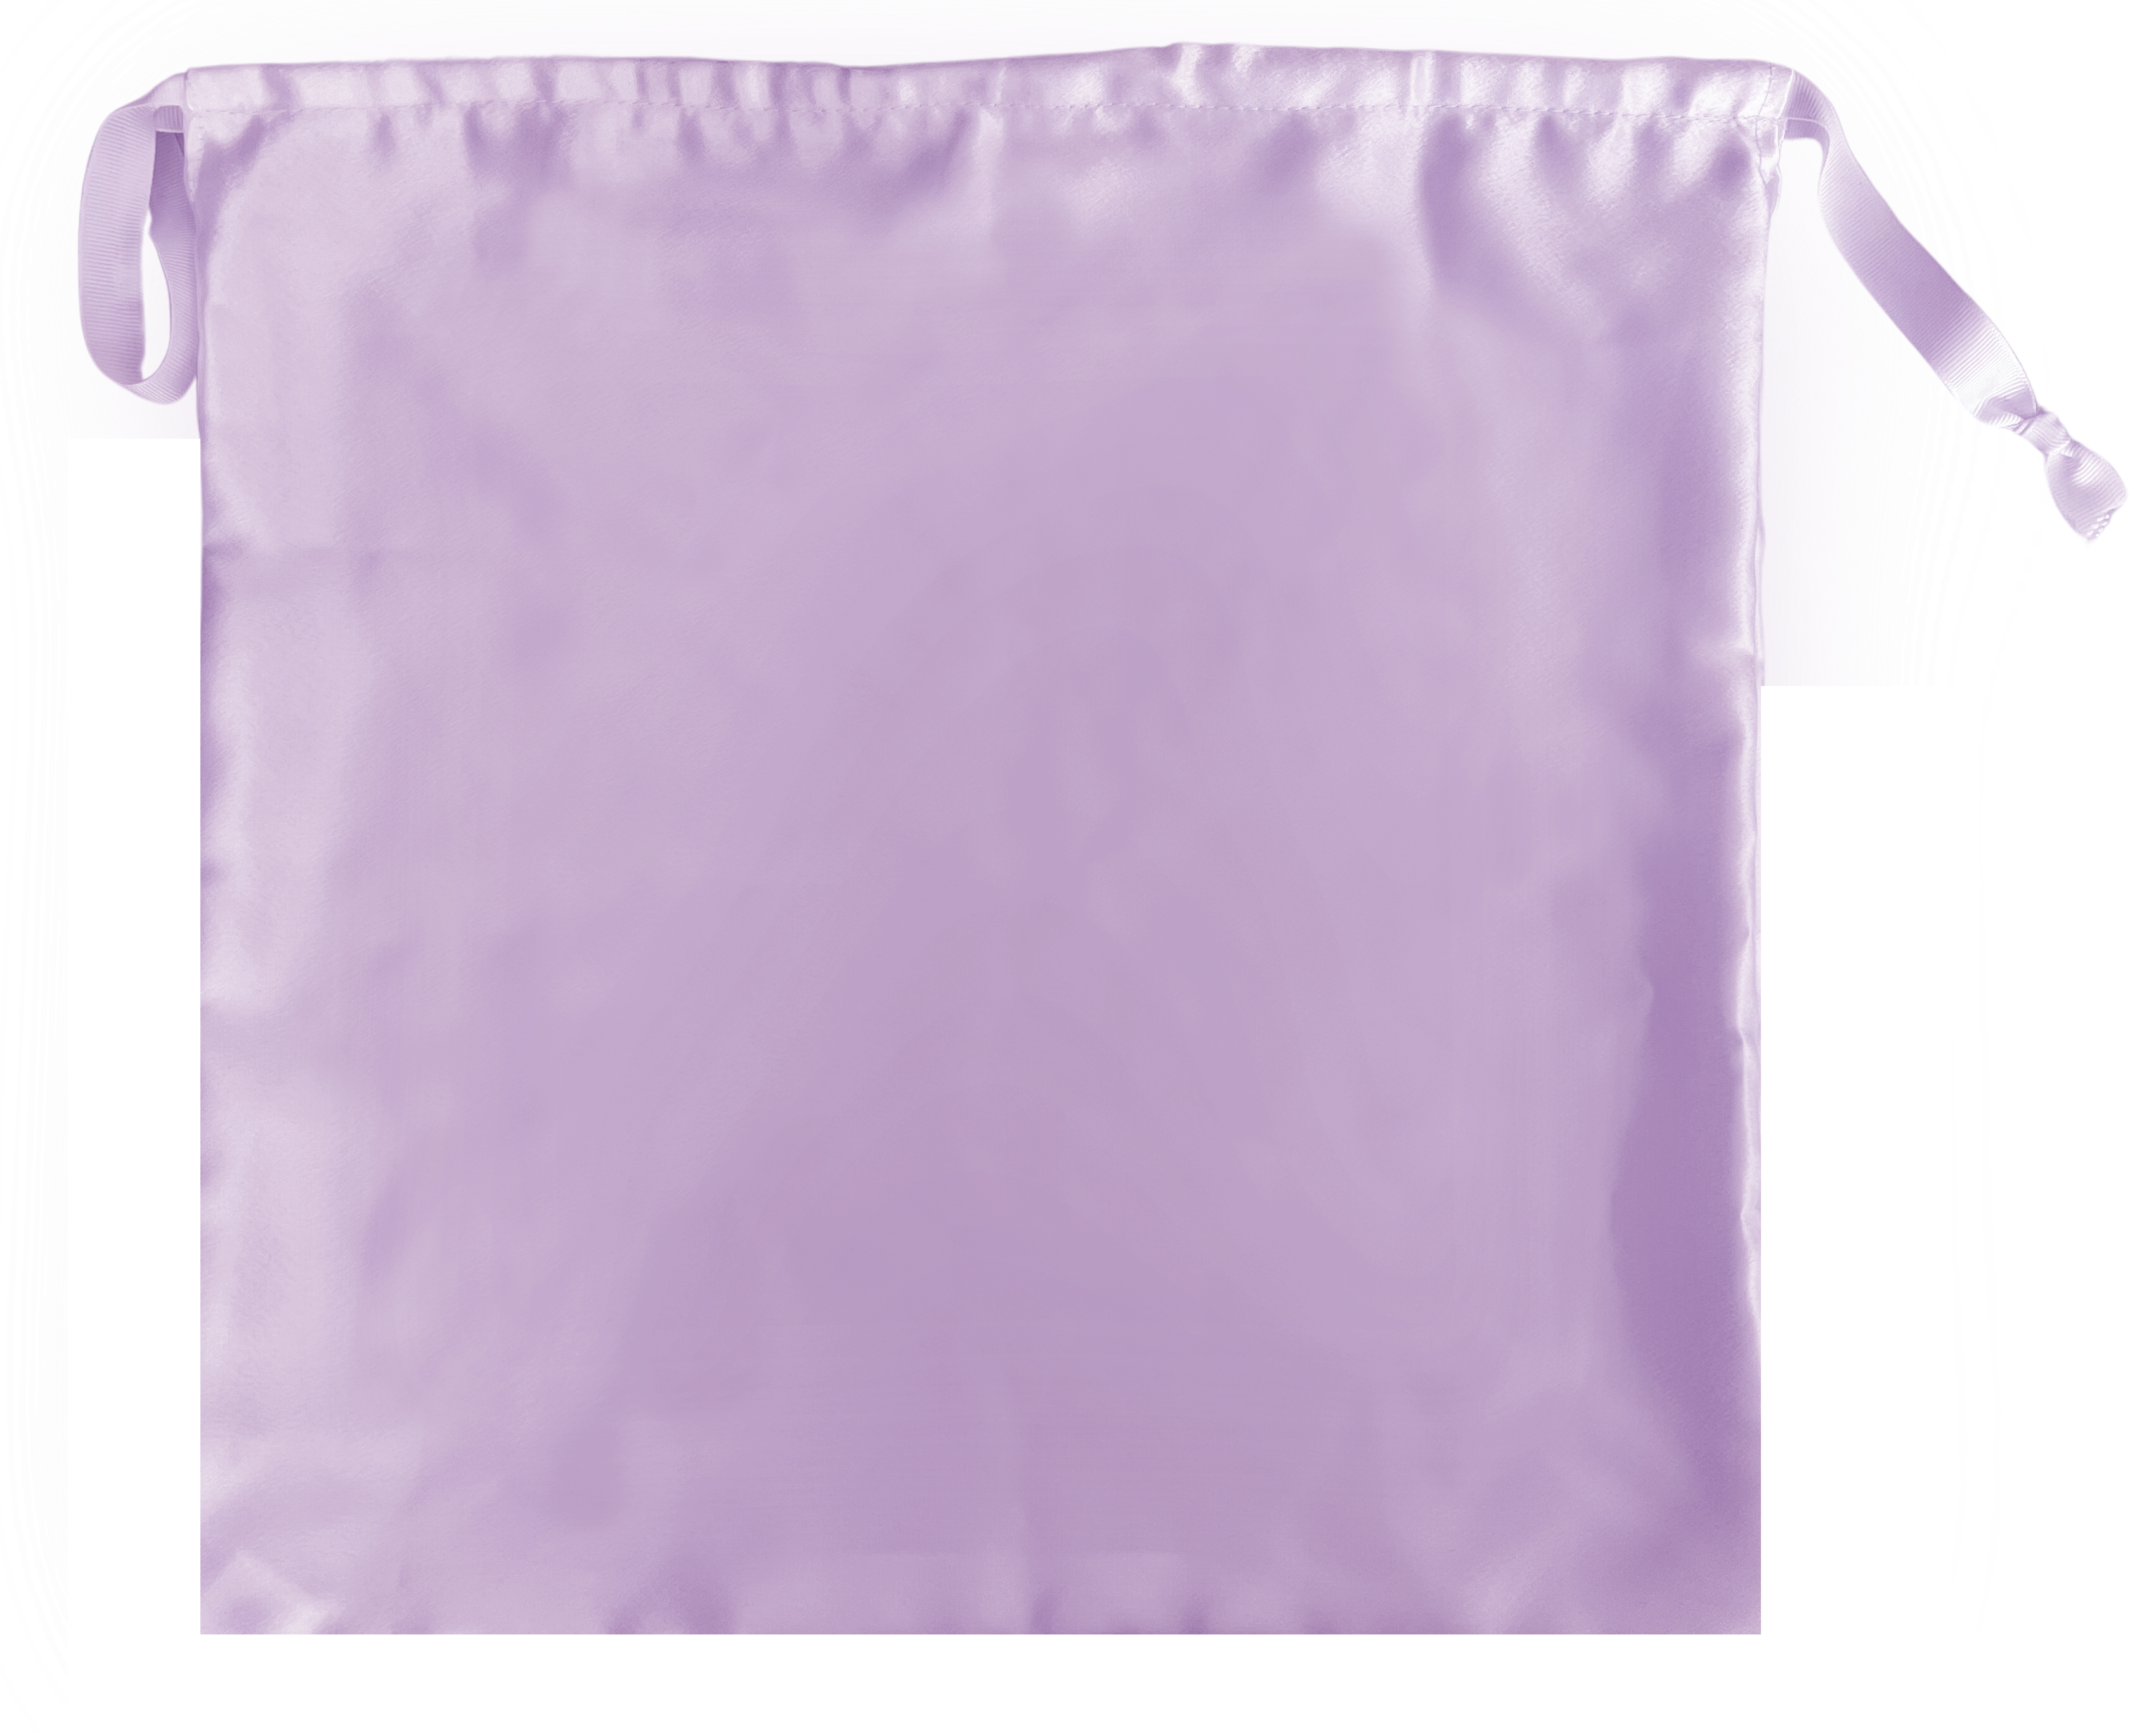 Lilac Satin Accessory Bag for purses, shoes, jewelry and more